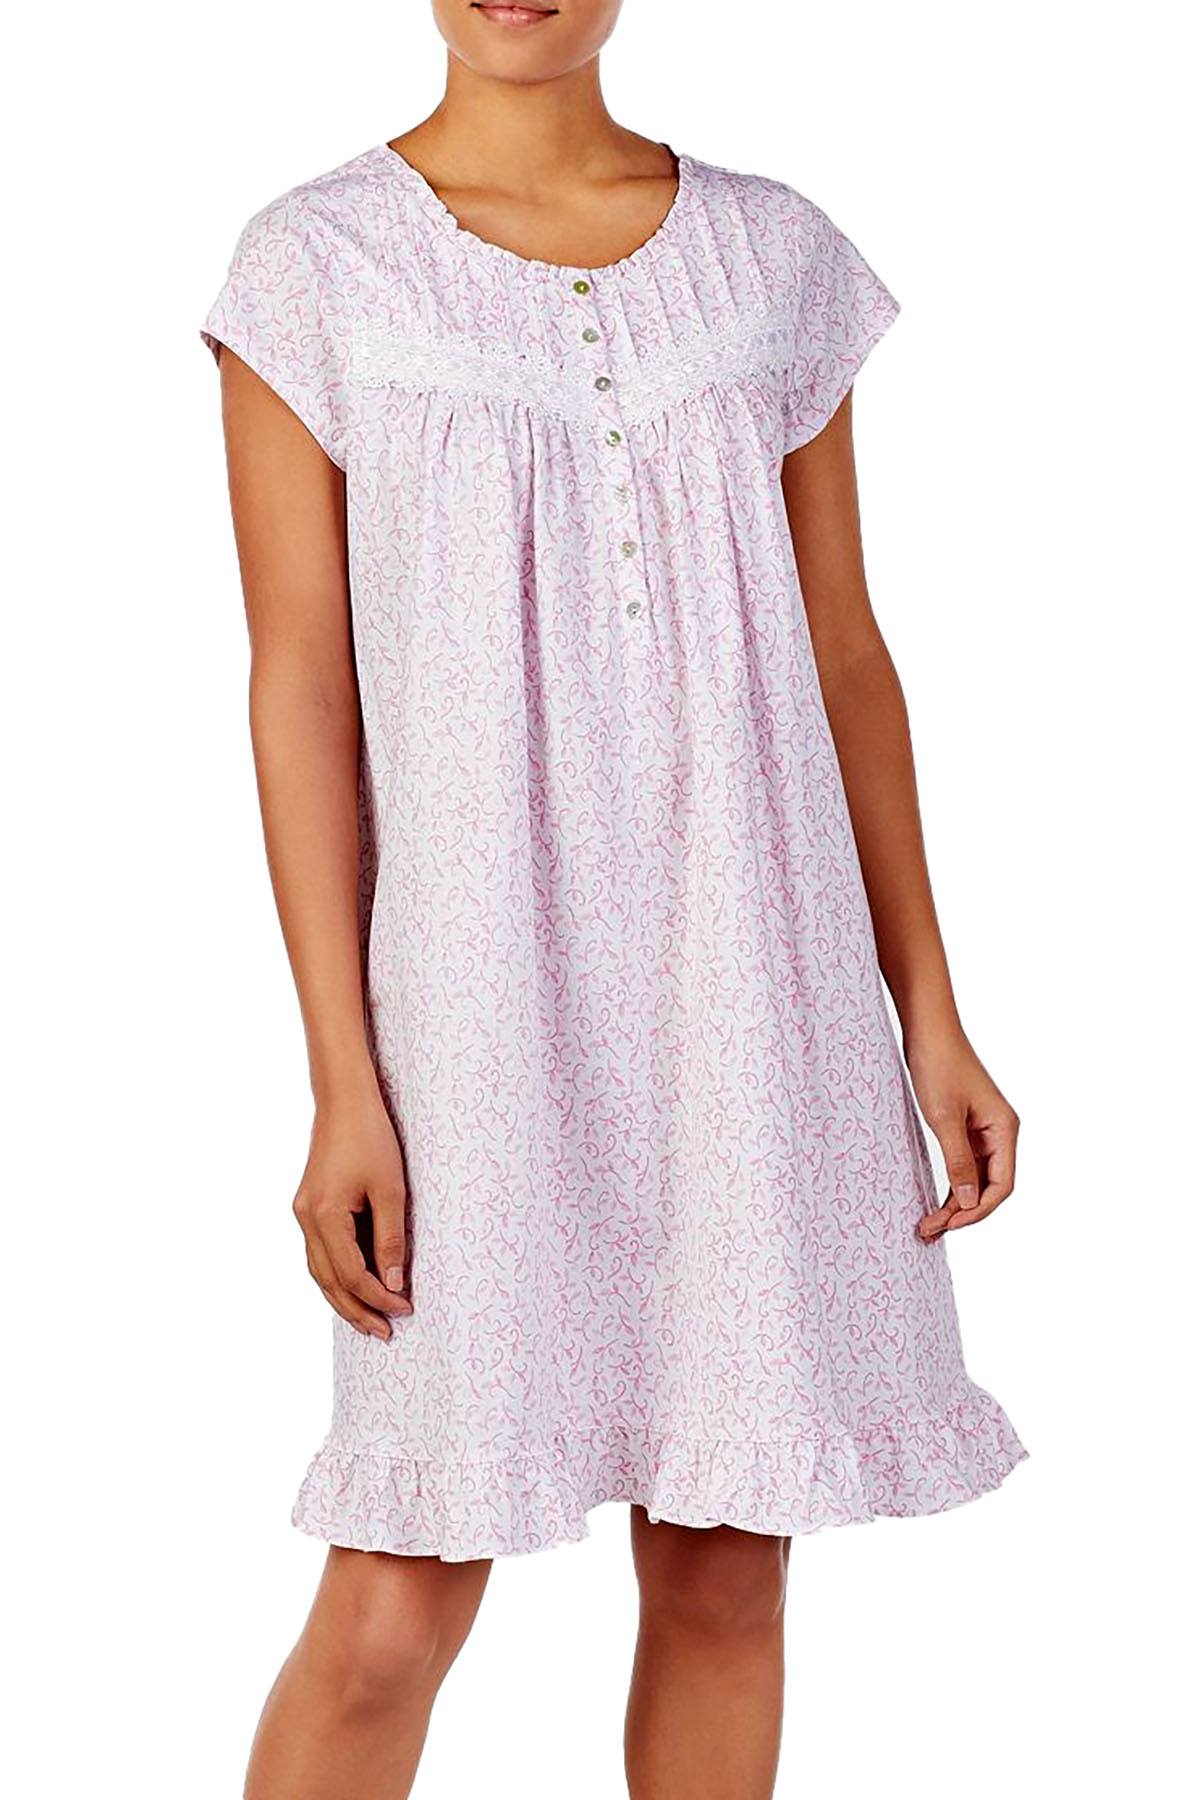 Eileen West Printed Cap Sleeve Cotton Nightgown in Pink